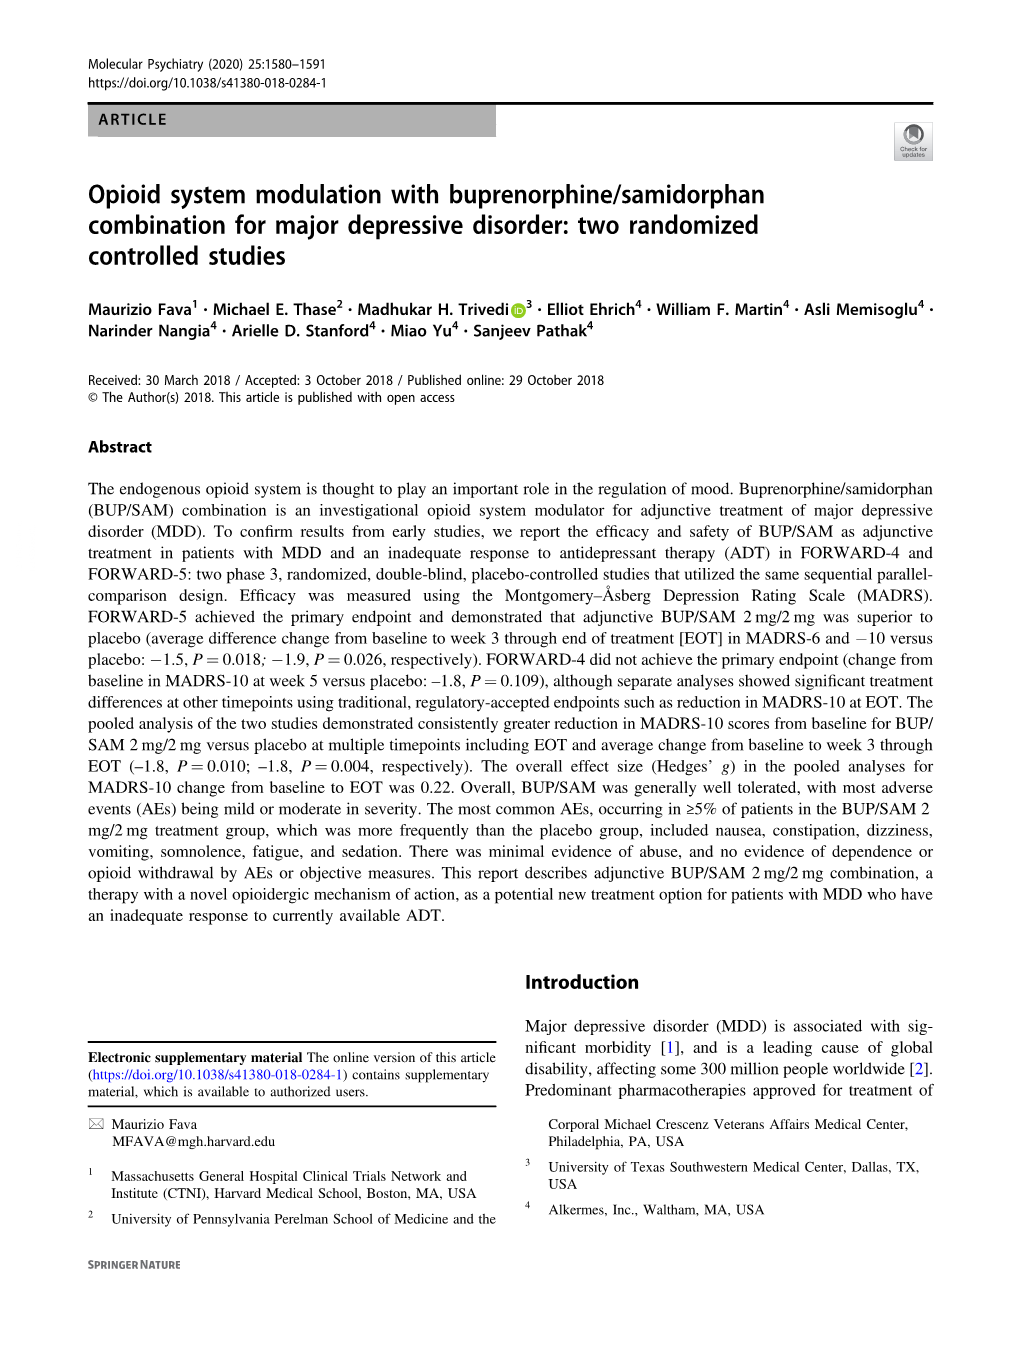 Opioid System Modulation with Buprenorphine/Samidorphan Combination for Major Depressive Disorder: Two Randomized Controlled Studies